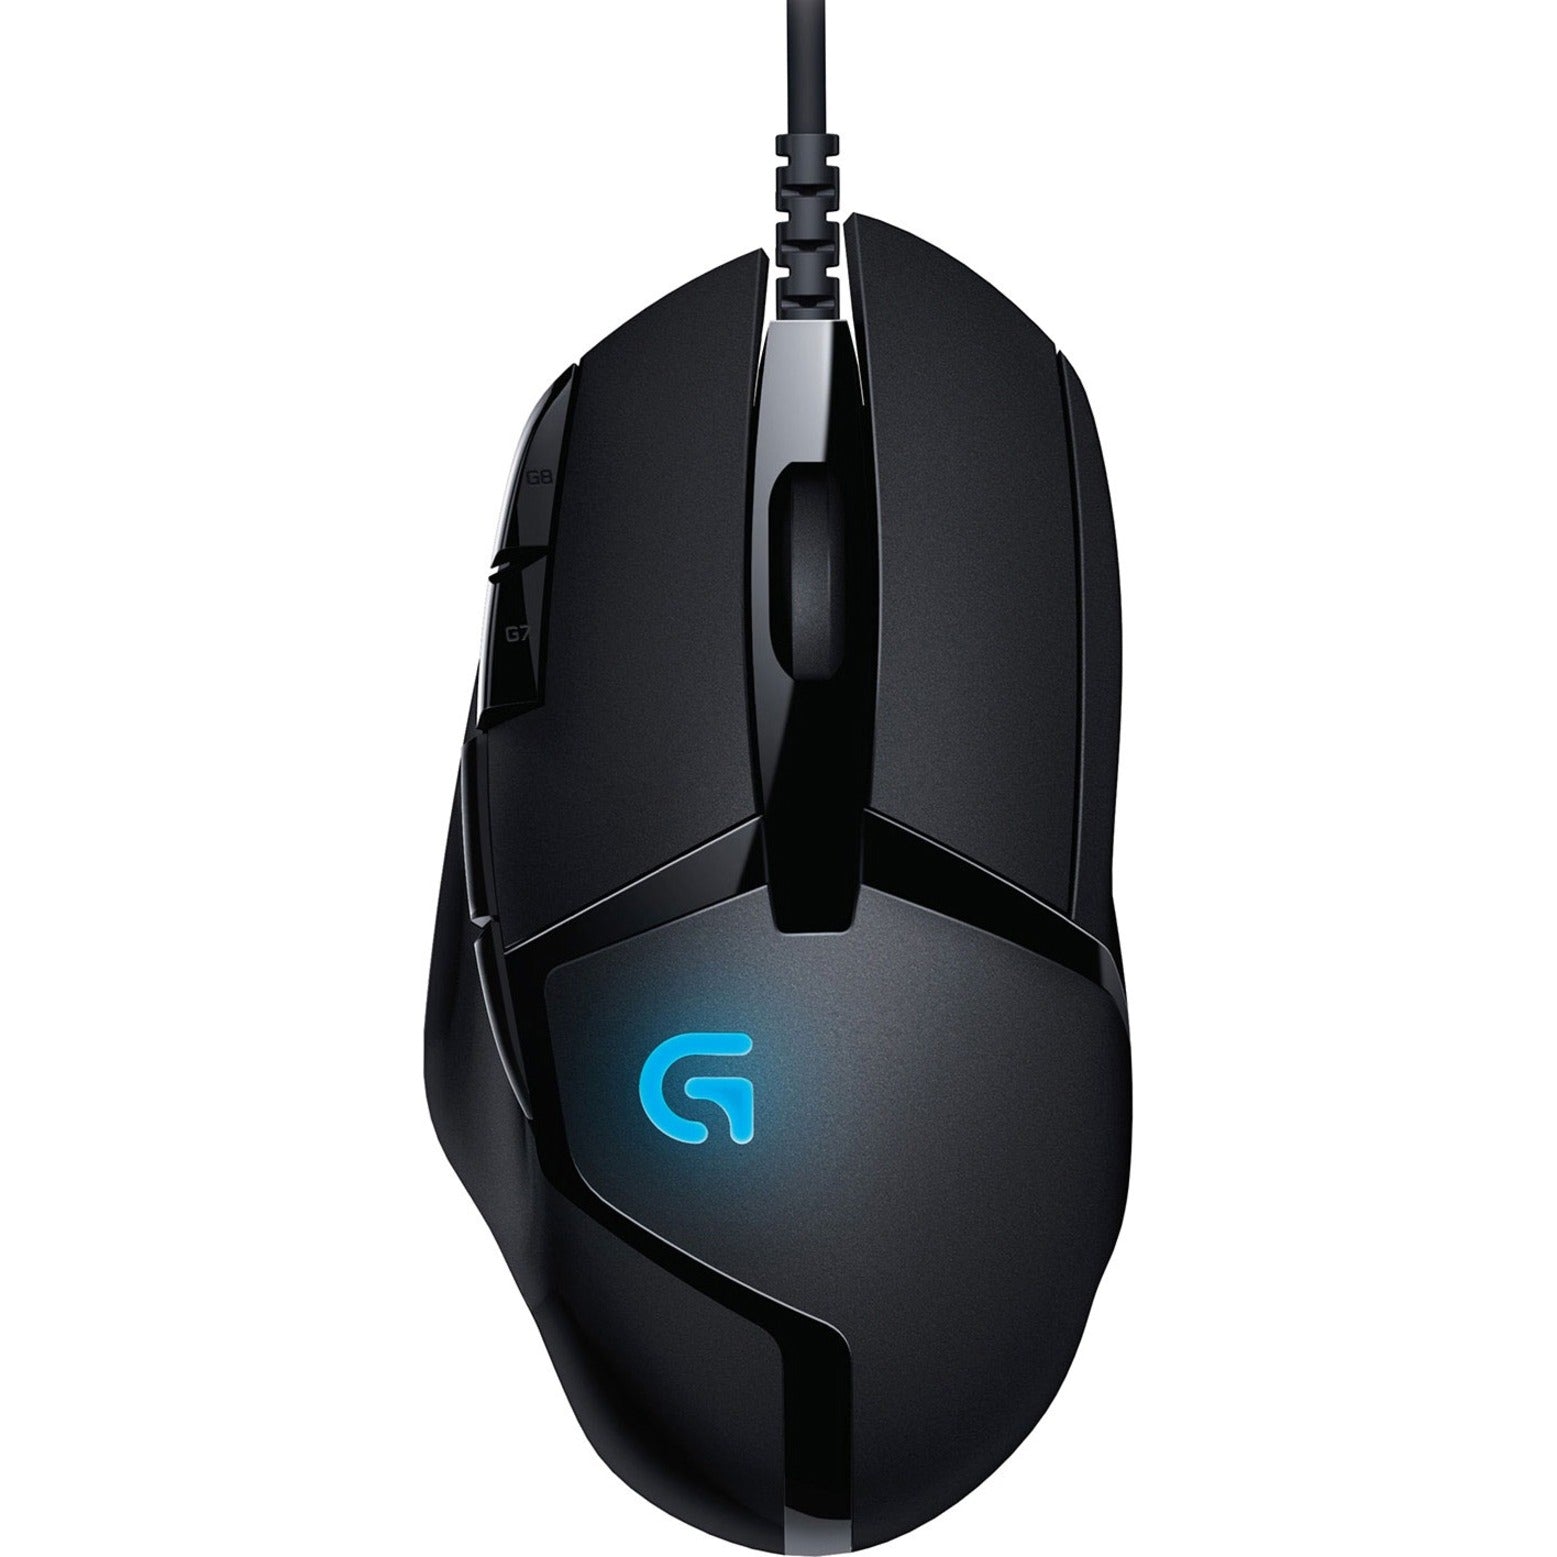 Logitech G300s USB Wired Gaming Mouse, 2, 500 DPI, RGB, Light Weight, 9  Programmable Controls, On-Board Memory, Compatible with PC/Mac - Black